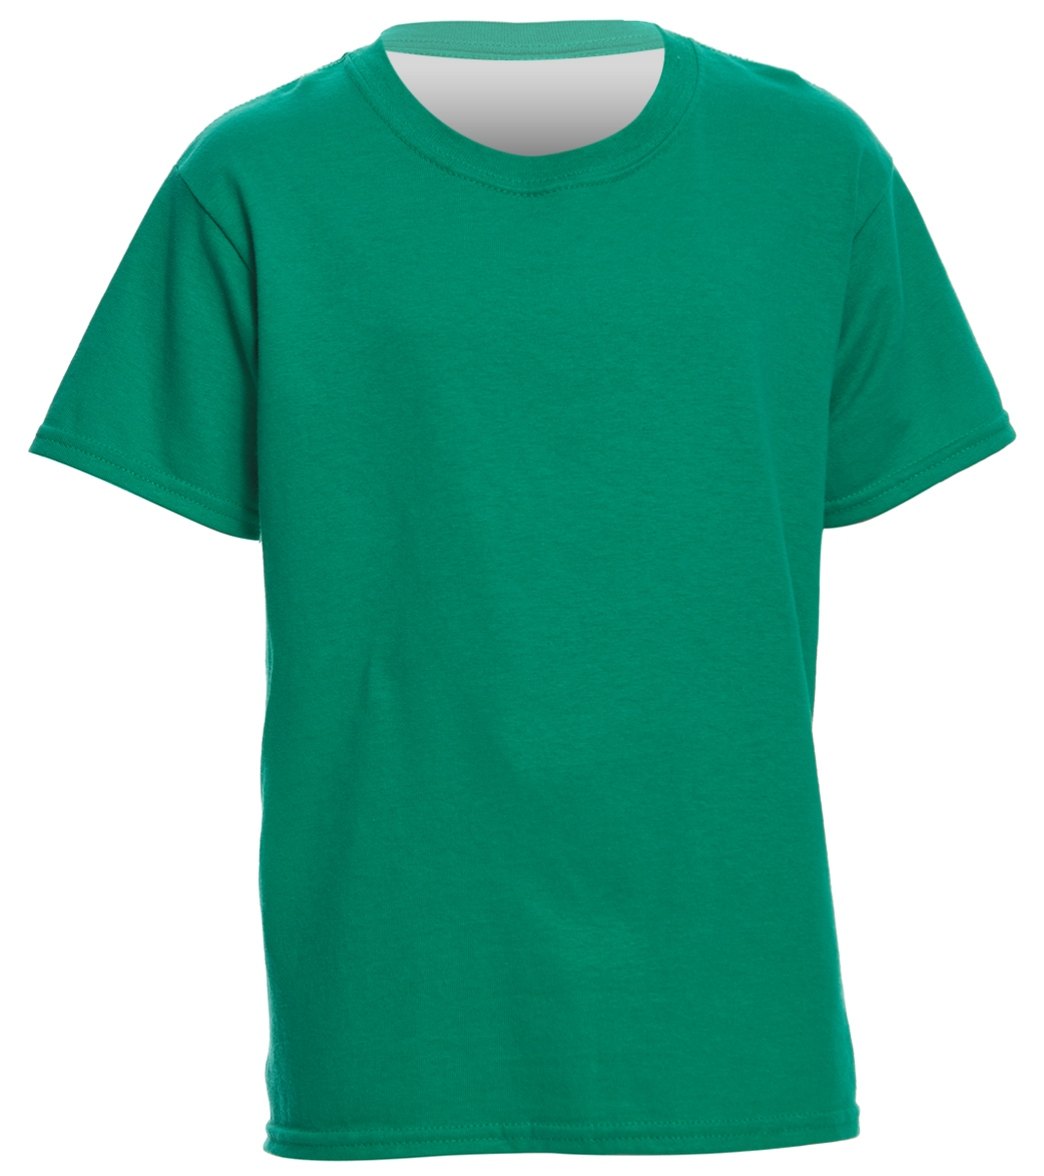 SwimOutlet Youth Cotton T Shirt - Brights